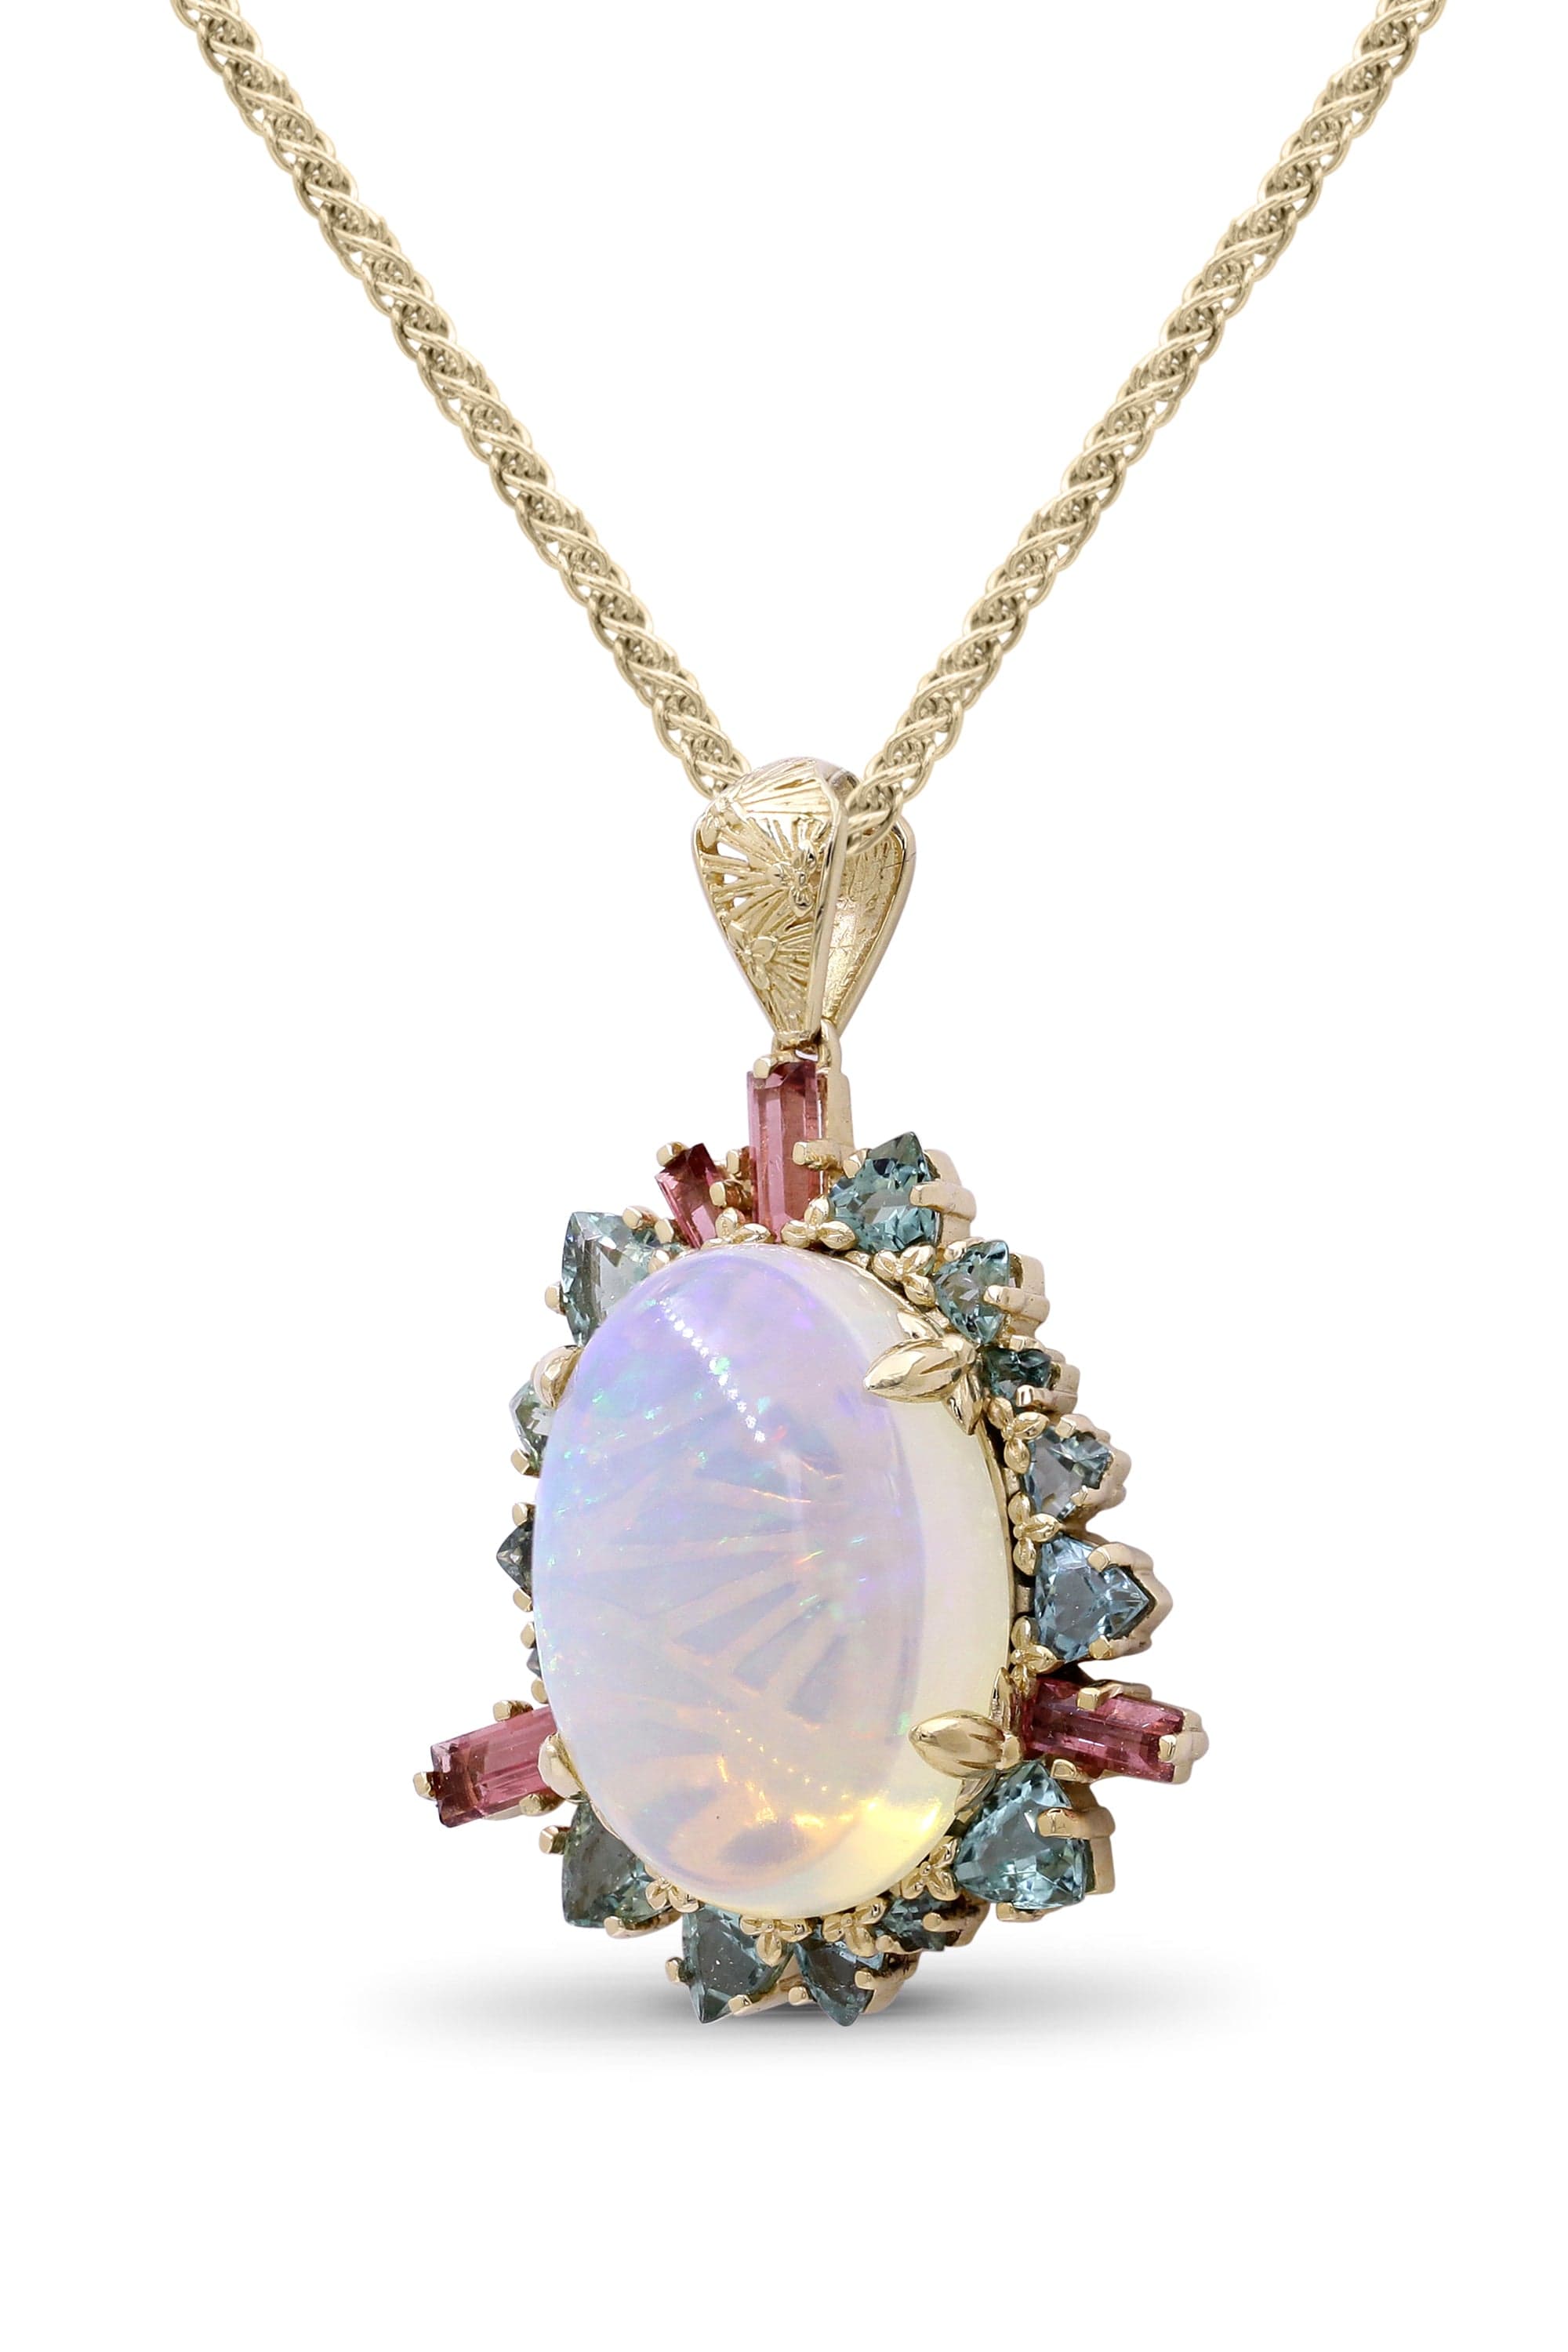 Buy Opal Necklace, Pink Australian Triplet Opal & Tourmaline Gemstone  Silver Plated Necklace, Handmade Adjustable Chunky Necklace, Gift for Her  Online in India - Etsy